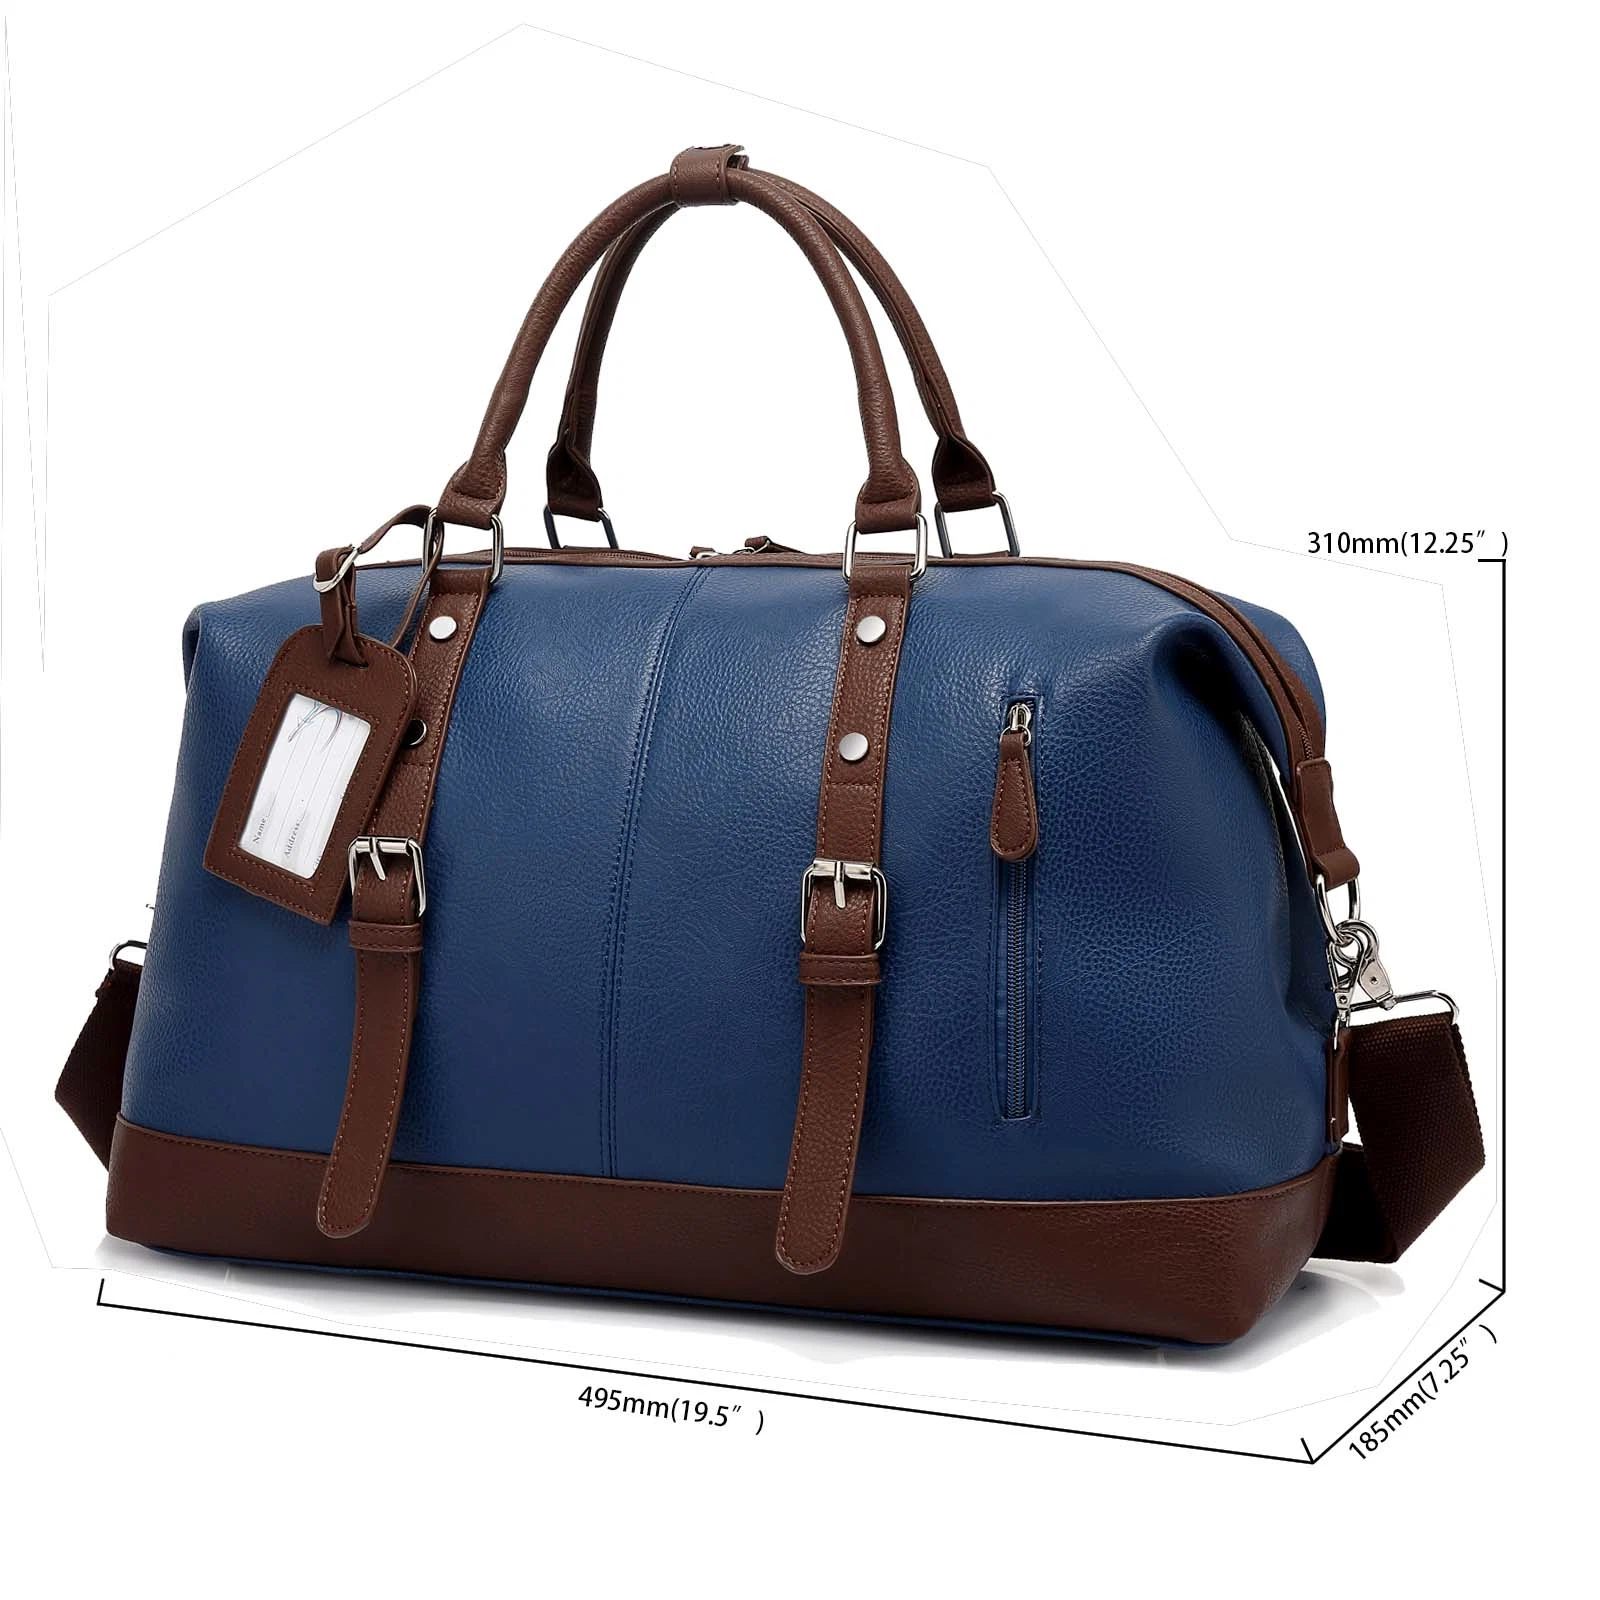 High quality/High cost performance New Classic Leather Fashion Handbag Tote Weekend Travel Bag